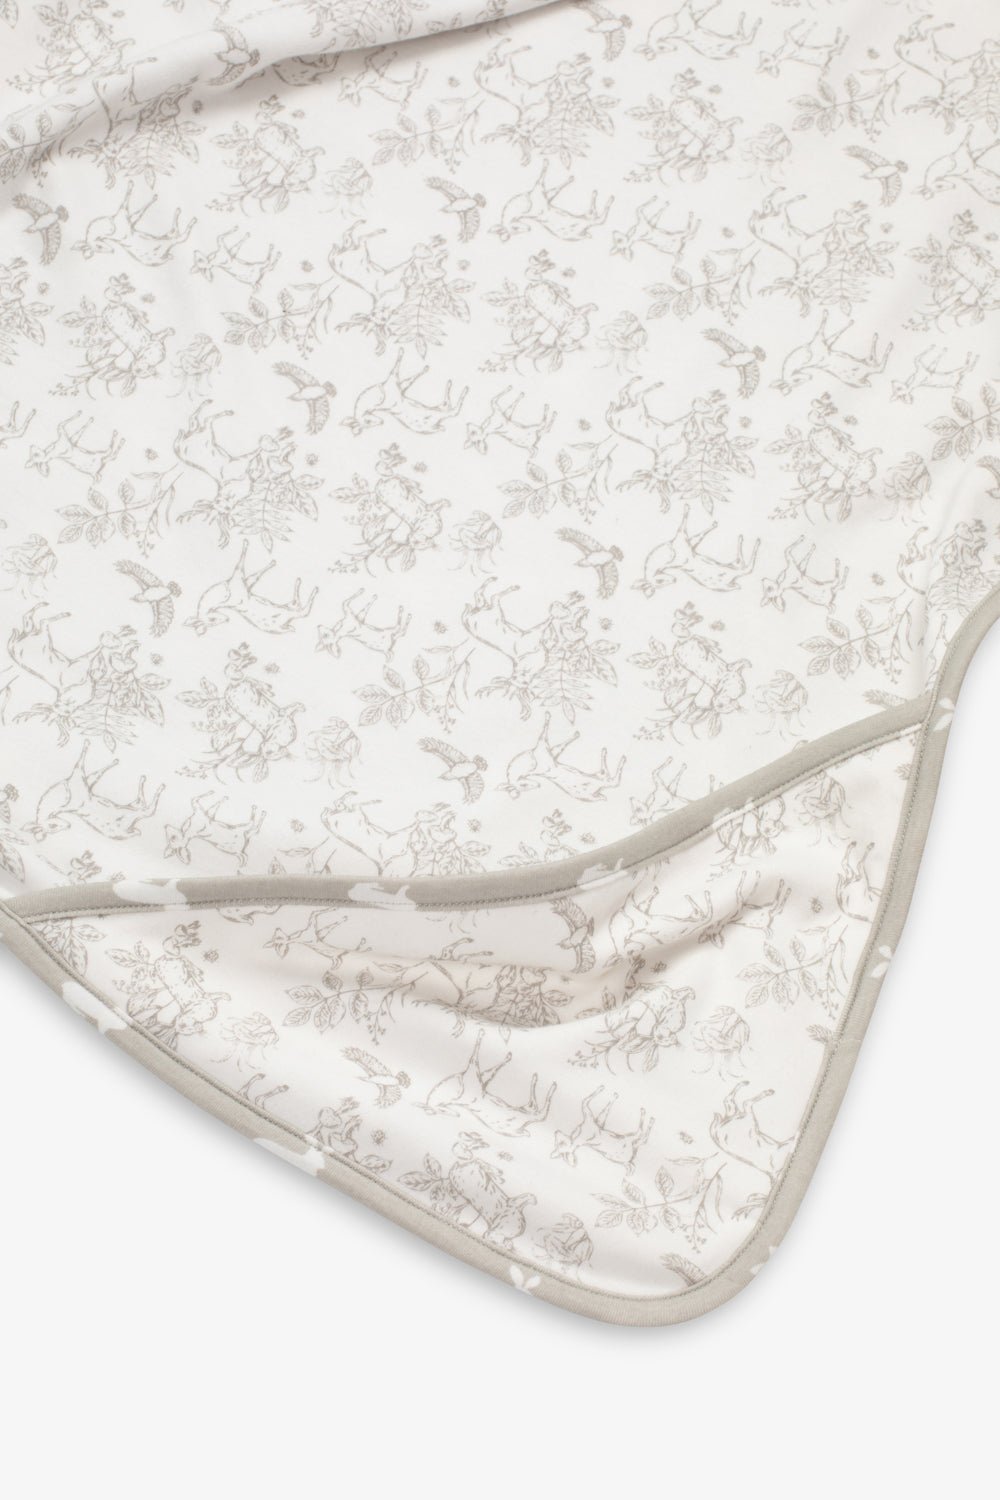 Jersey Blanket white woodland and fawn hare print